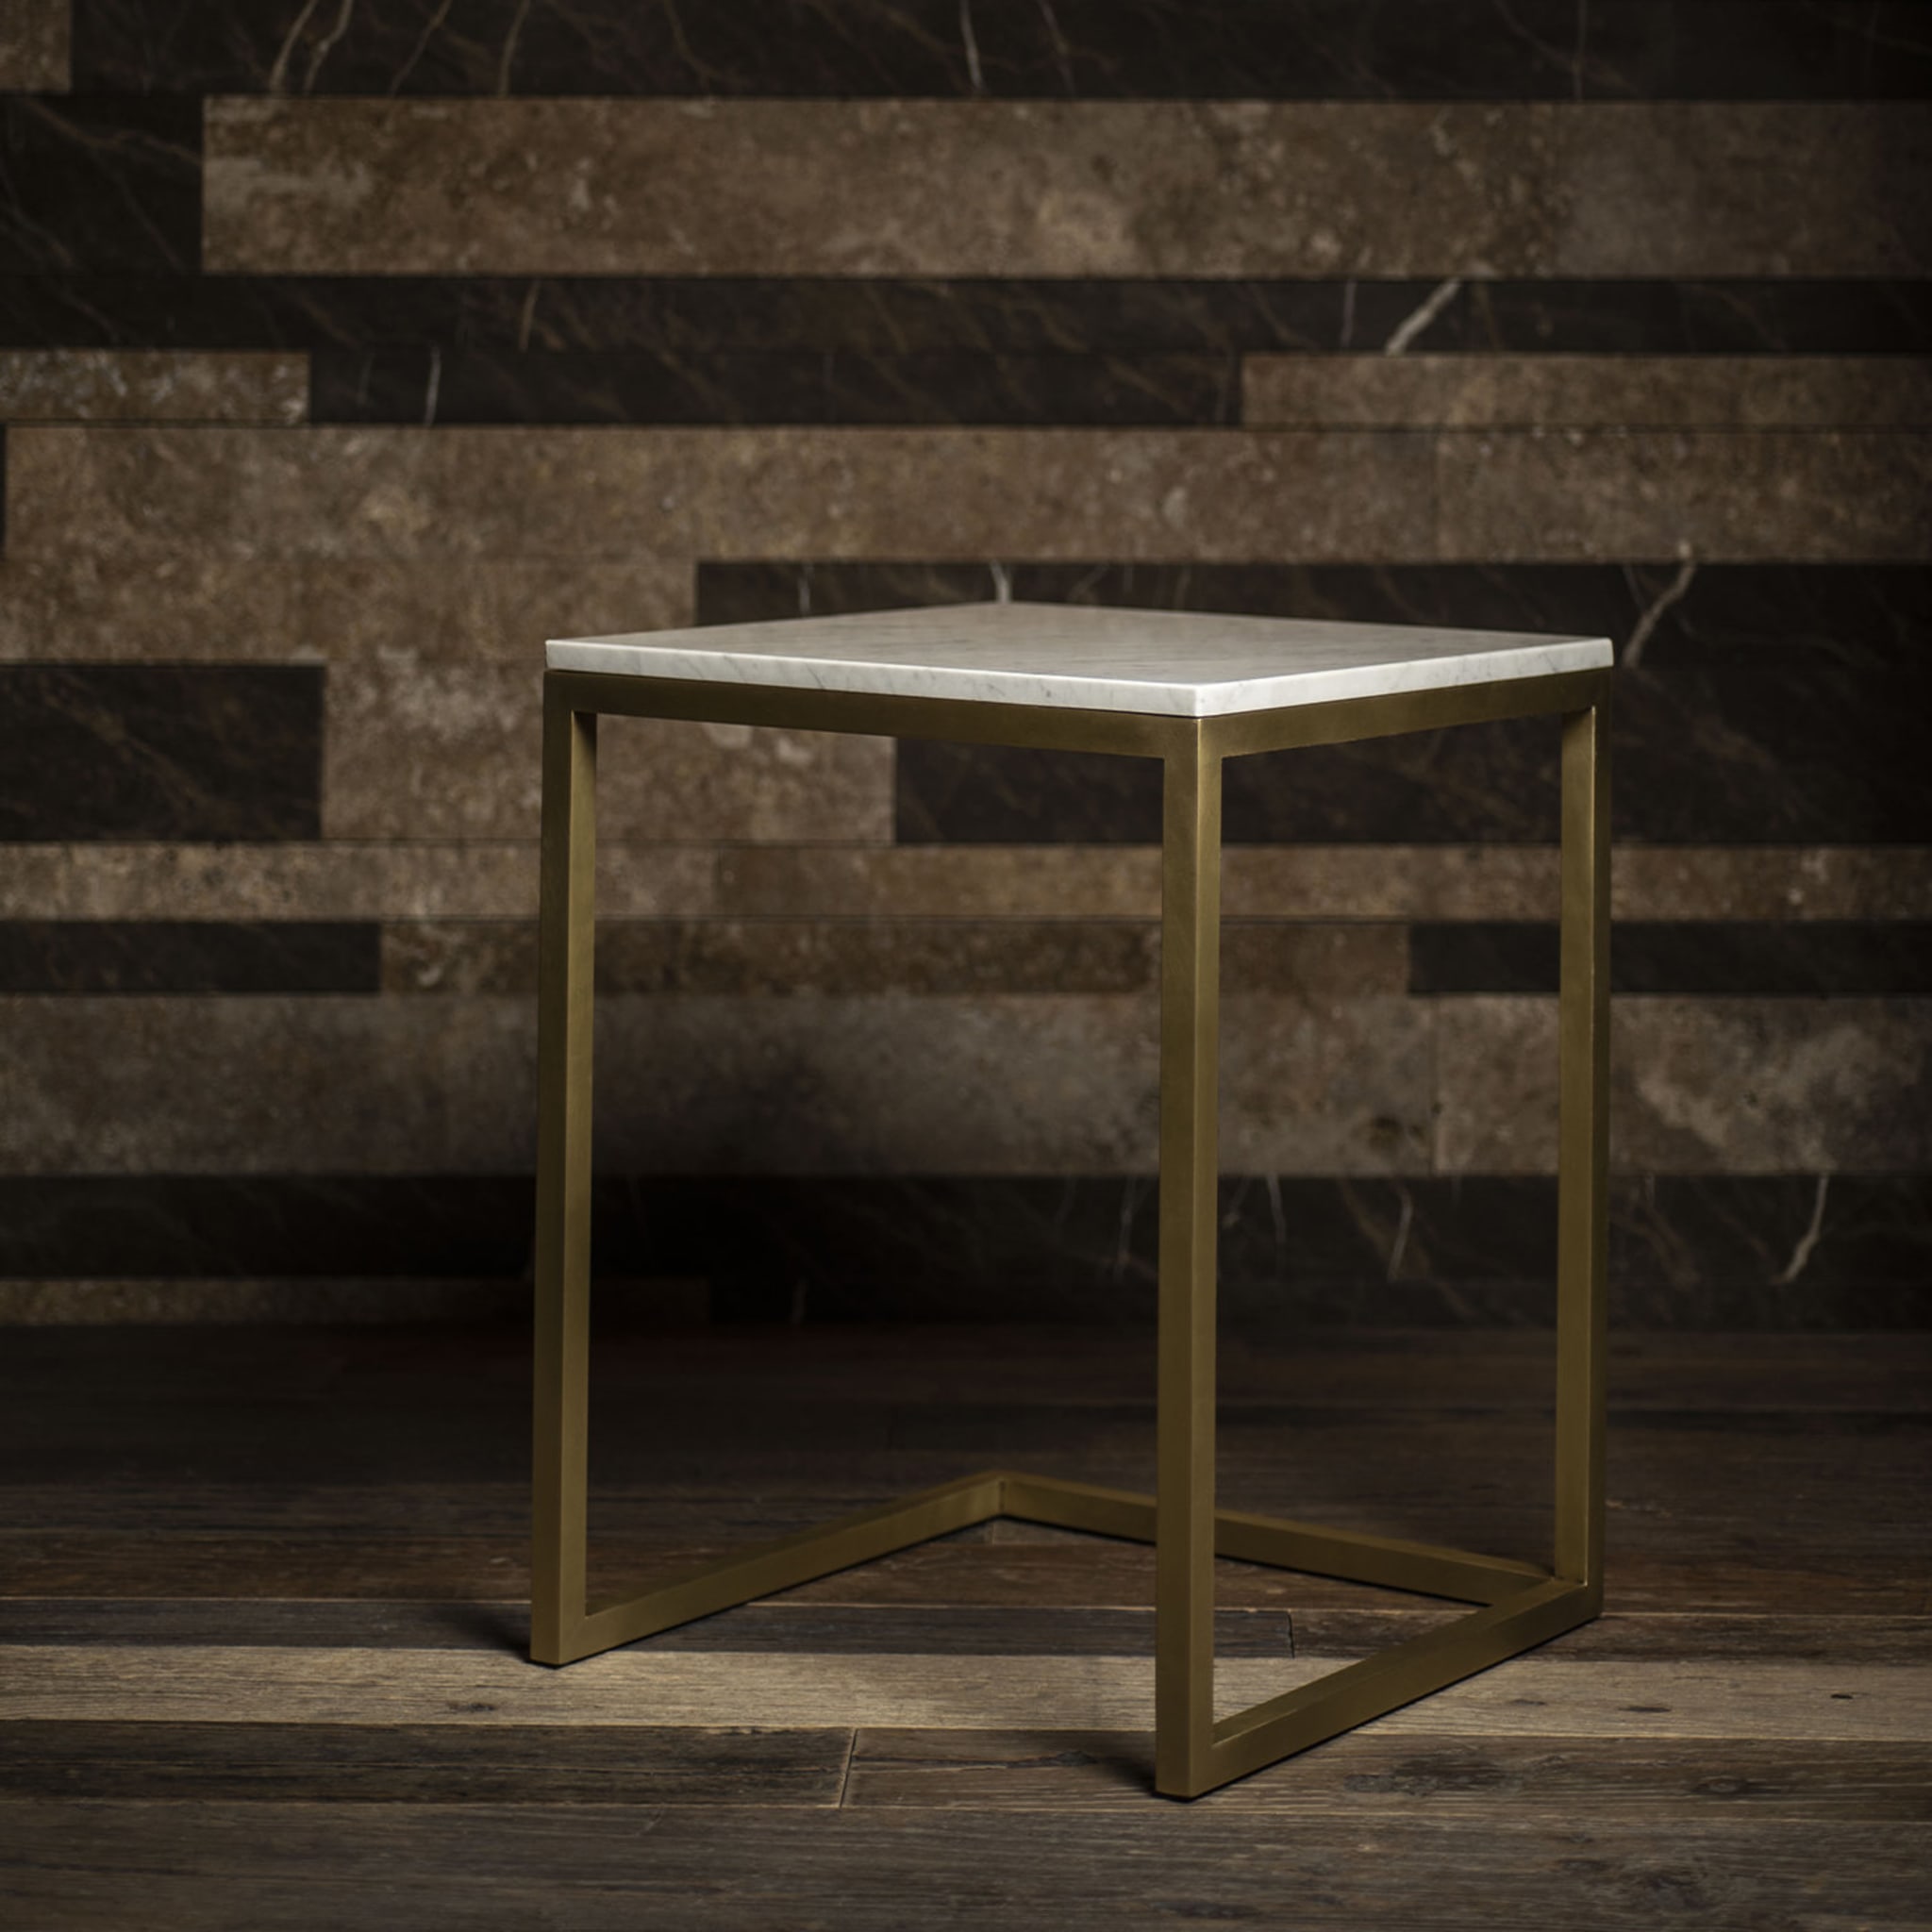 Esopo Brass and White Marble Side Table by Antonio Saporito - Alternative view 3